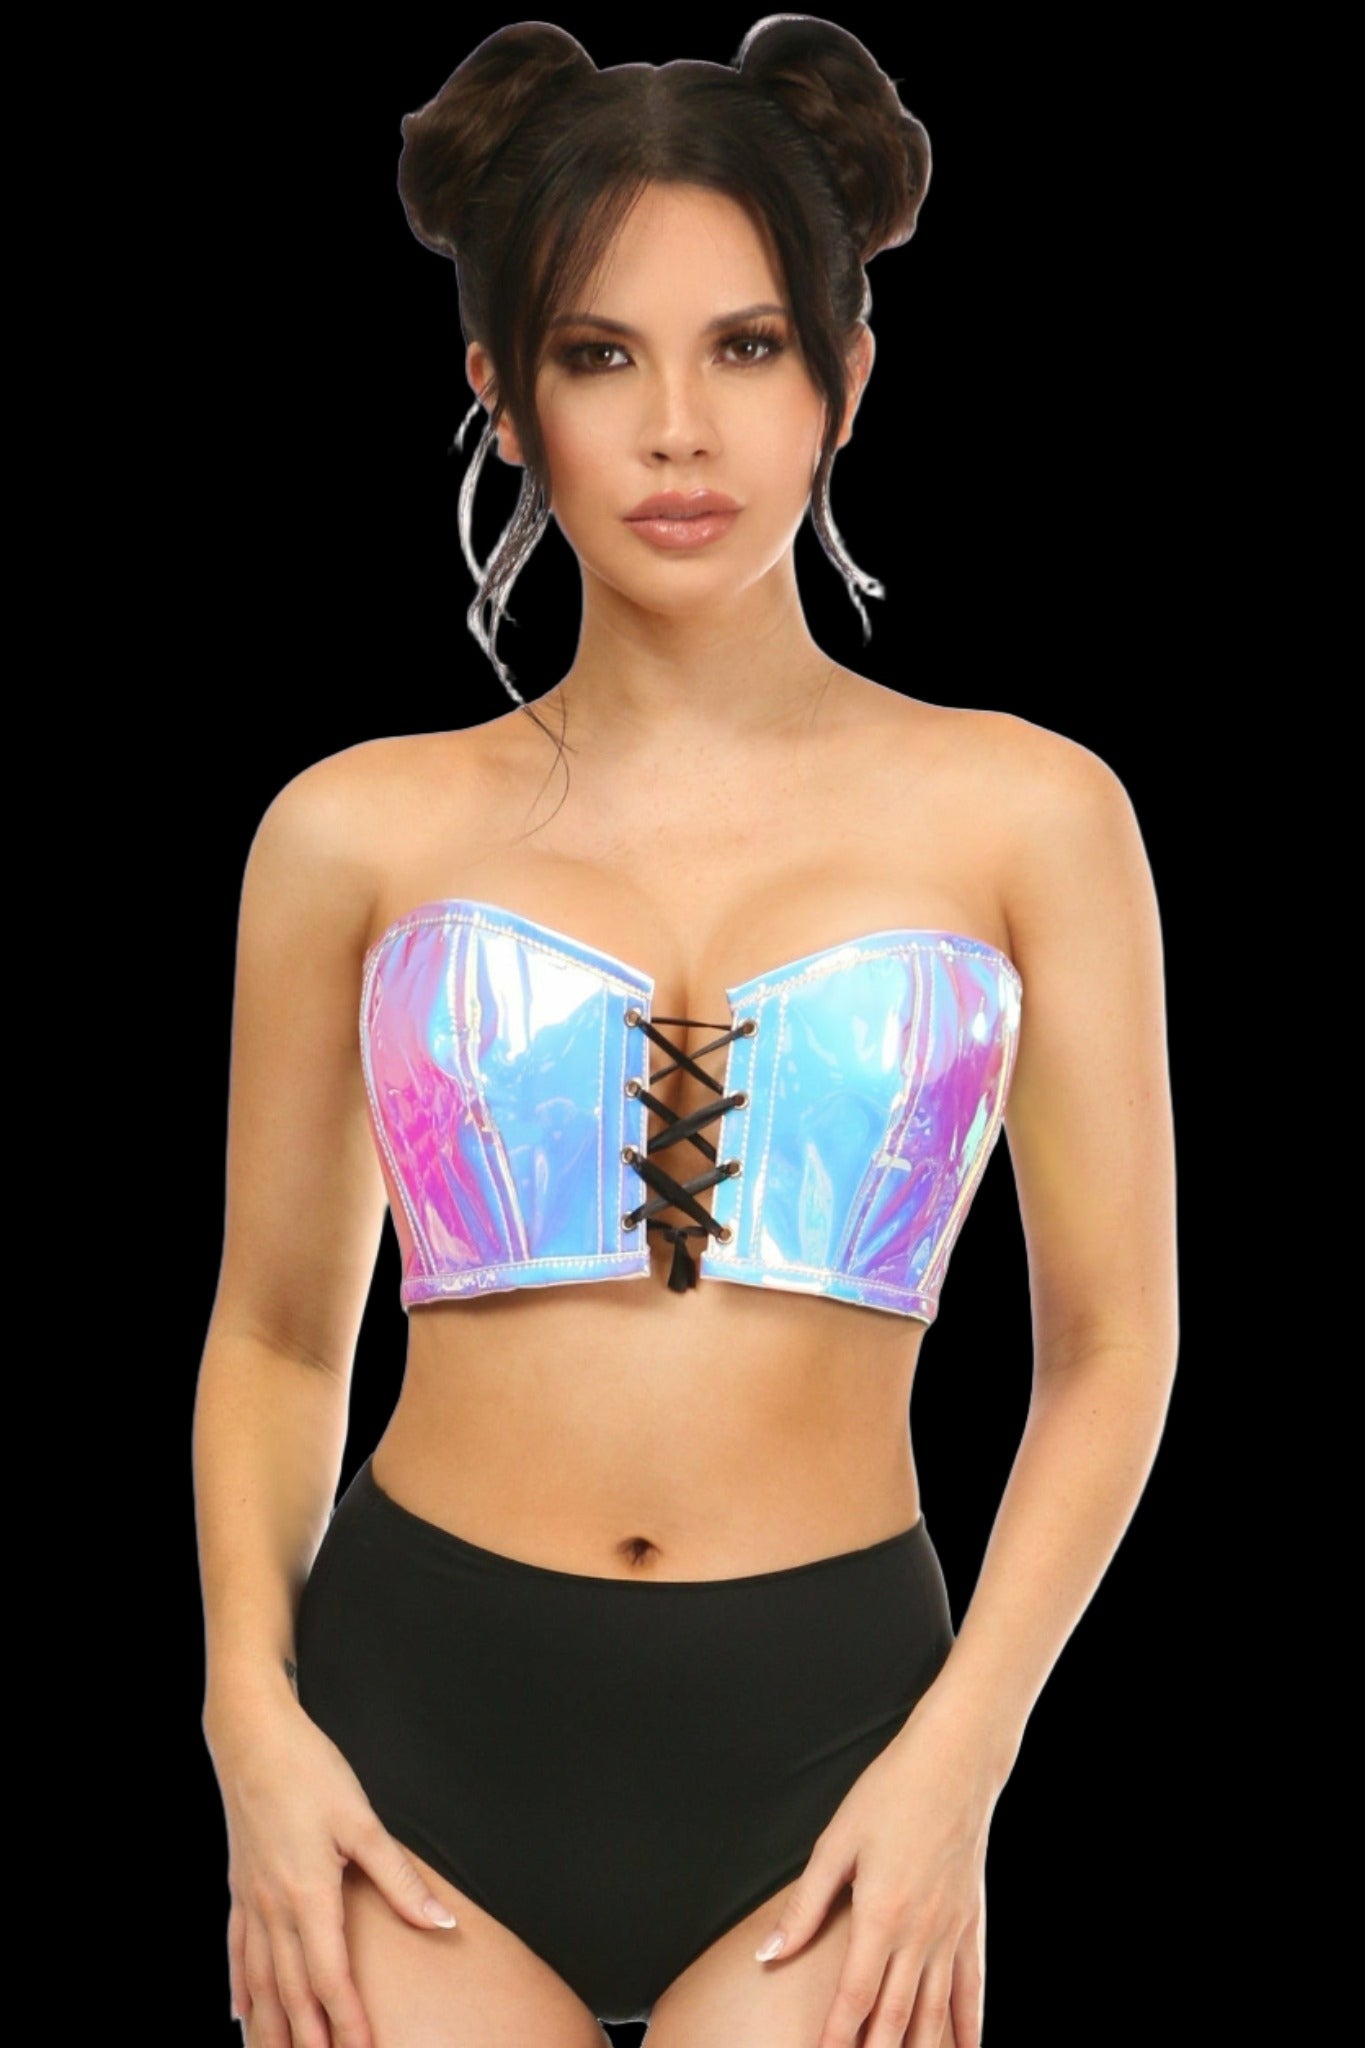 Lavish Hologram Lace-Up Bustier in 6 Color Choices in Size S, M, L, XL, 2X, 3X, 4X, 5X, or 6X